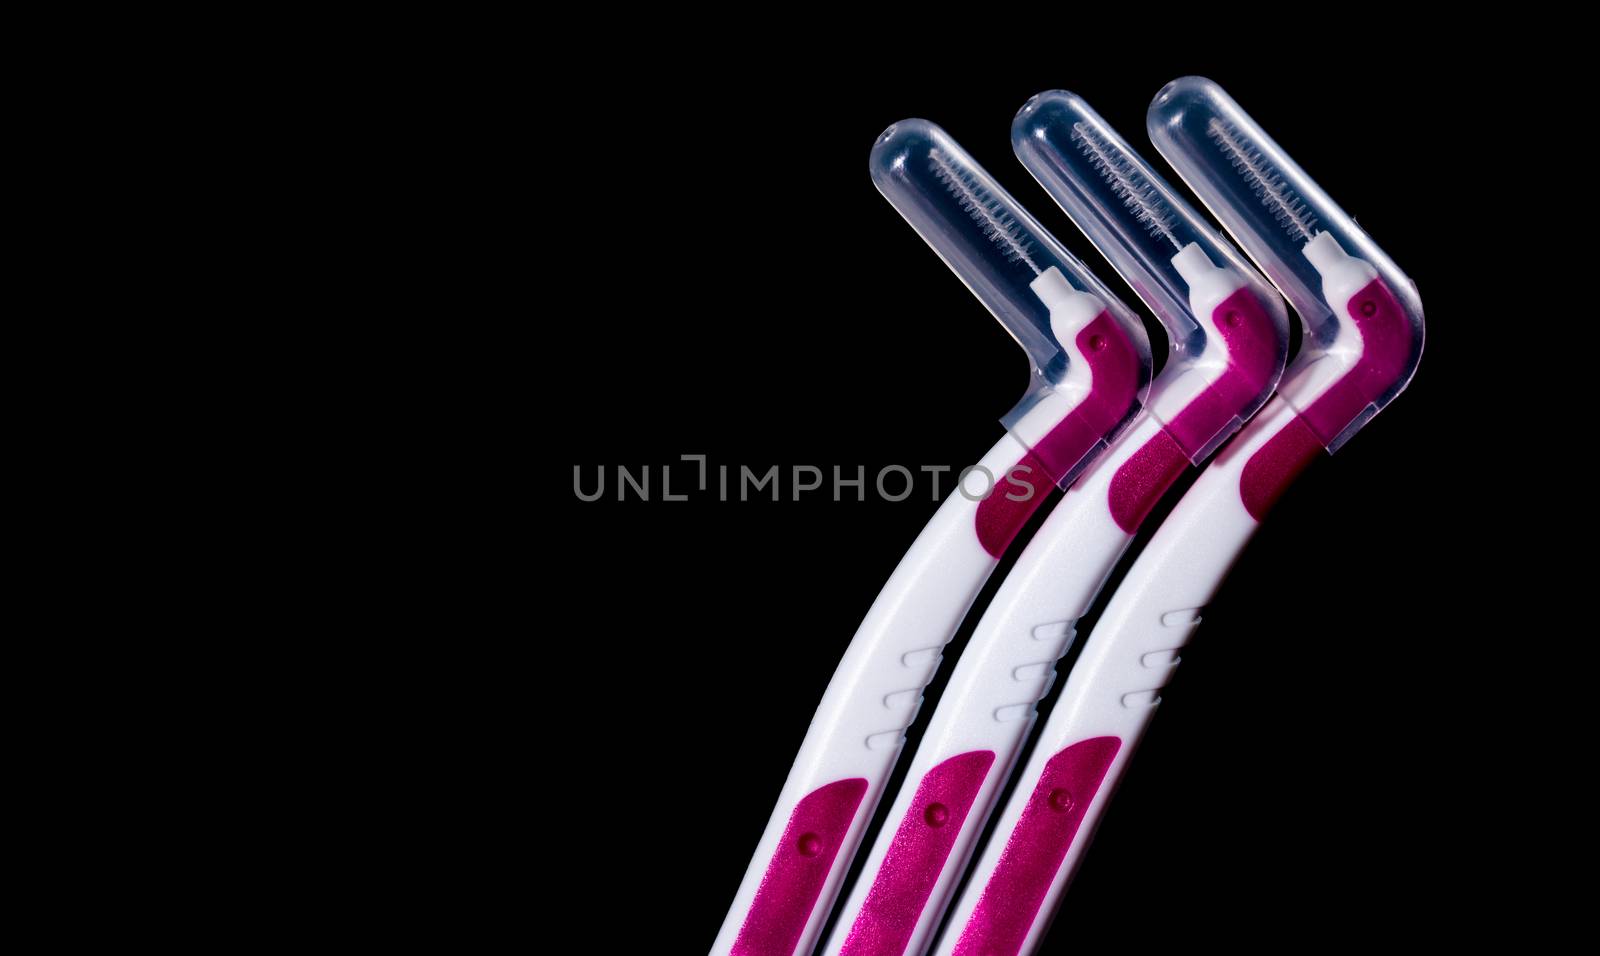 Three interdental brush with cover isolated on black background with copy space for text. Dental care concept. Equipment for get rid of food stuck in teeth by Fahroni